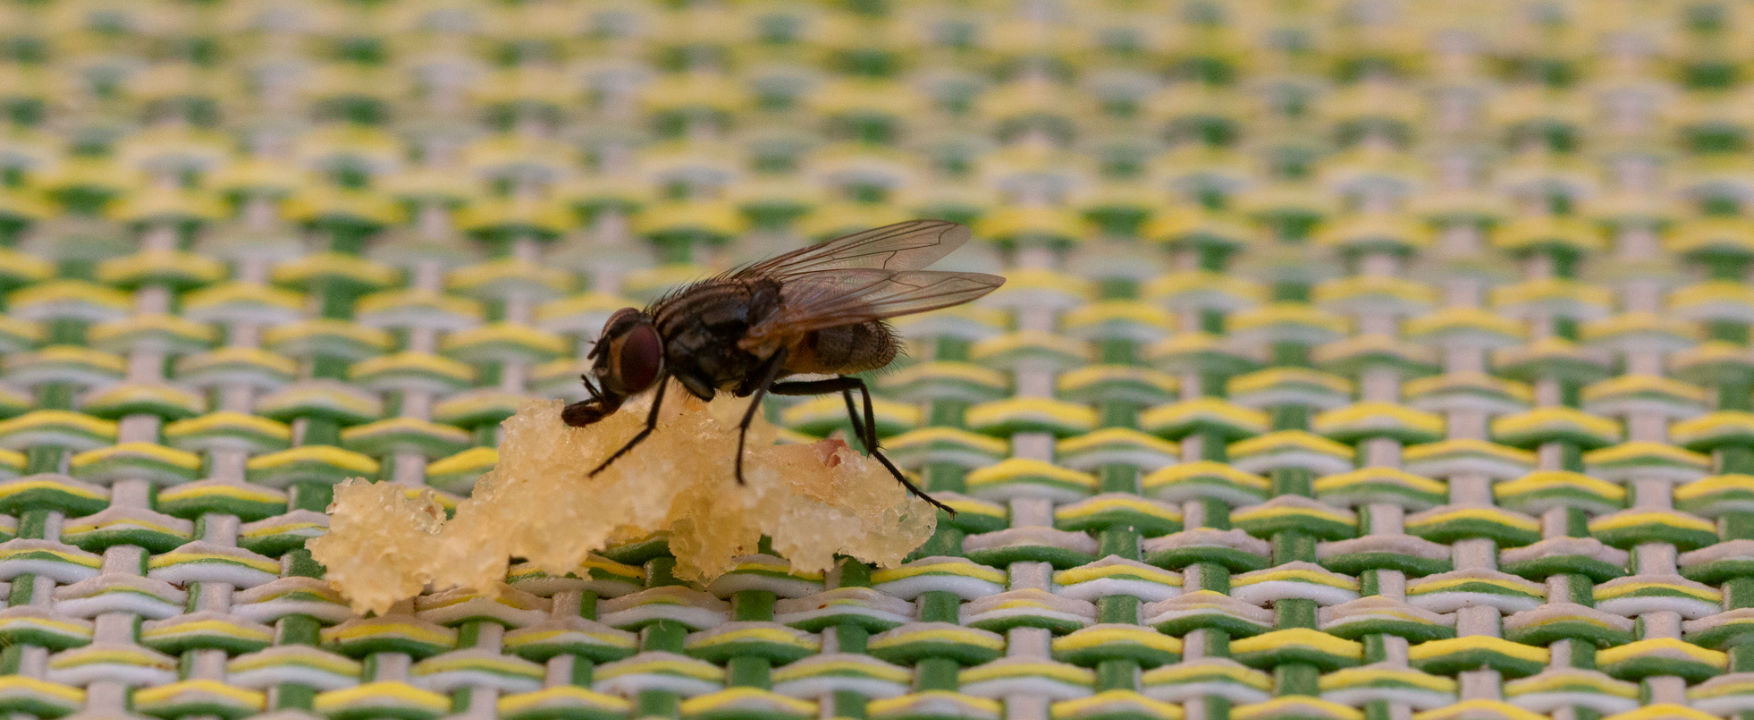 How to get rid of flies - Fly pest control Adelaide pest exterminator